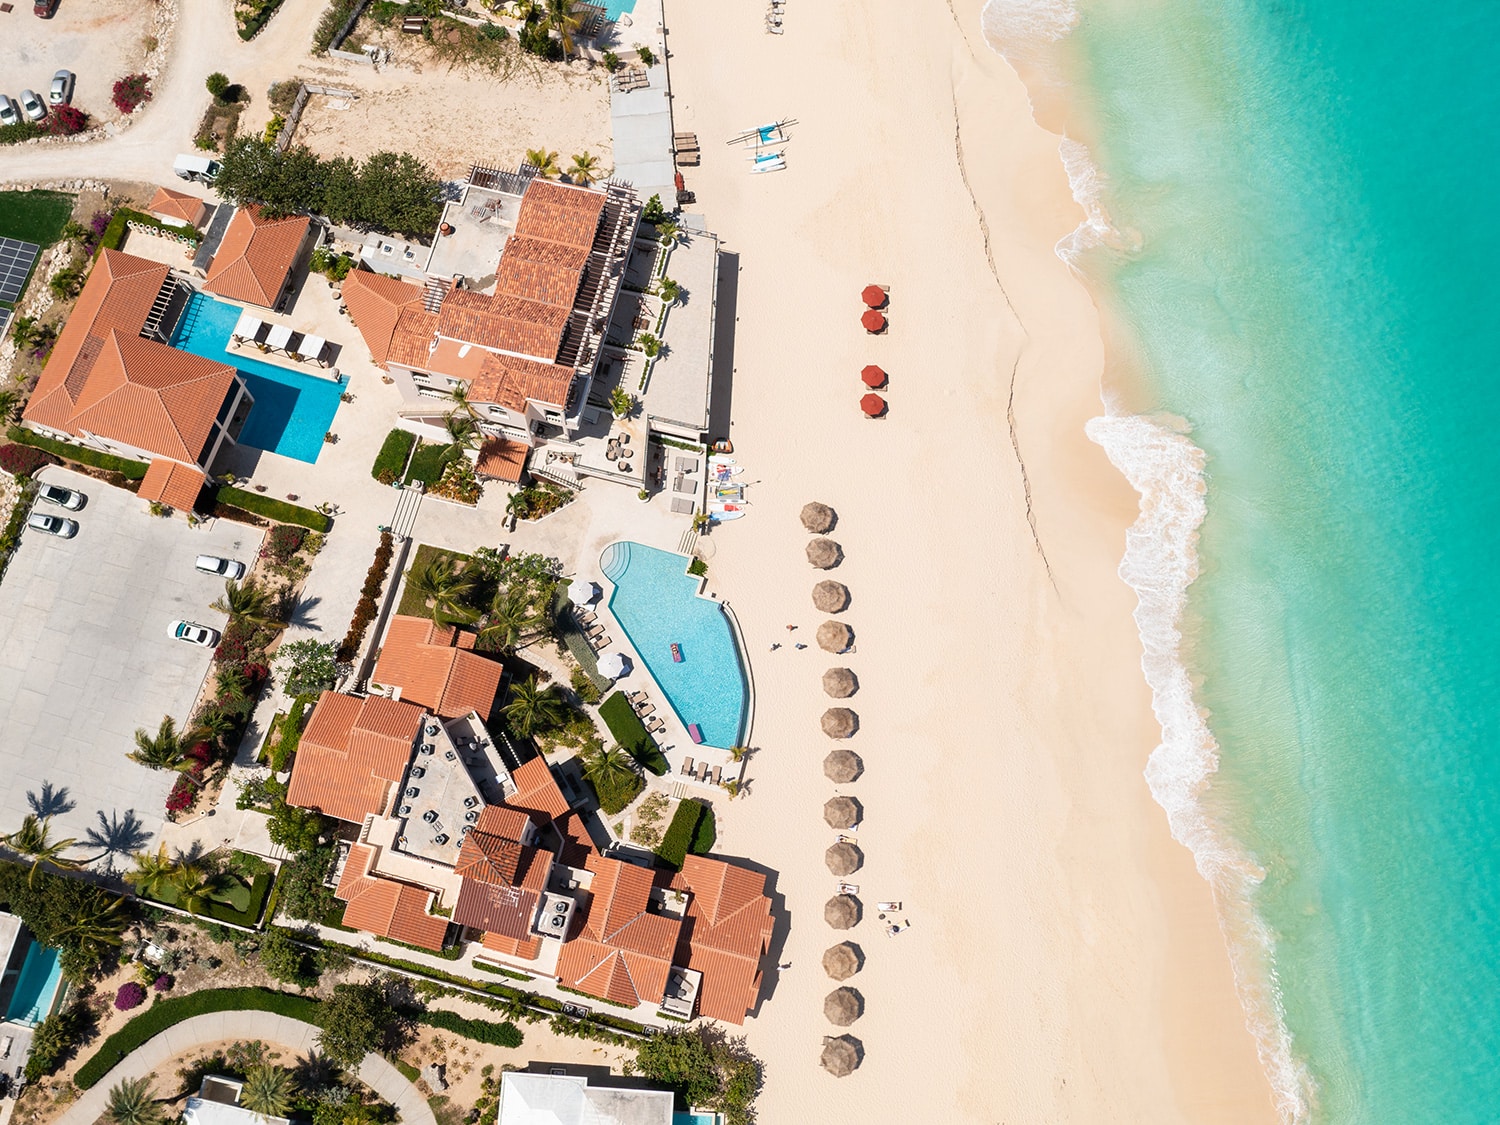 An aerial view of the property at Frangipani Beach Resort, located on Meads Bay in Anguilla.